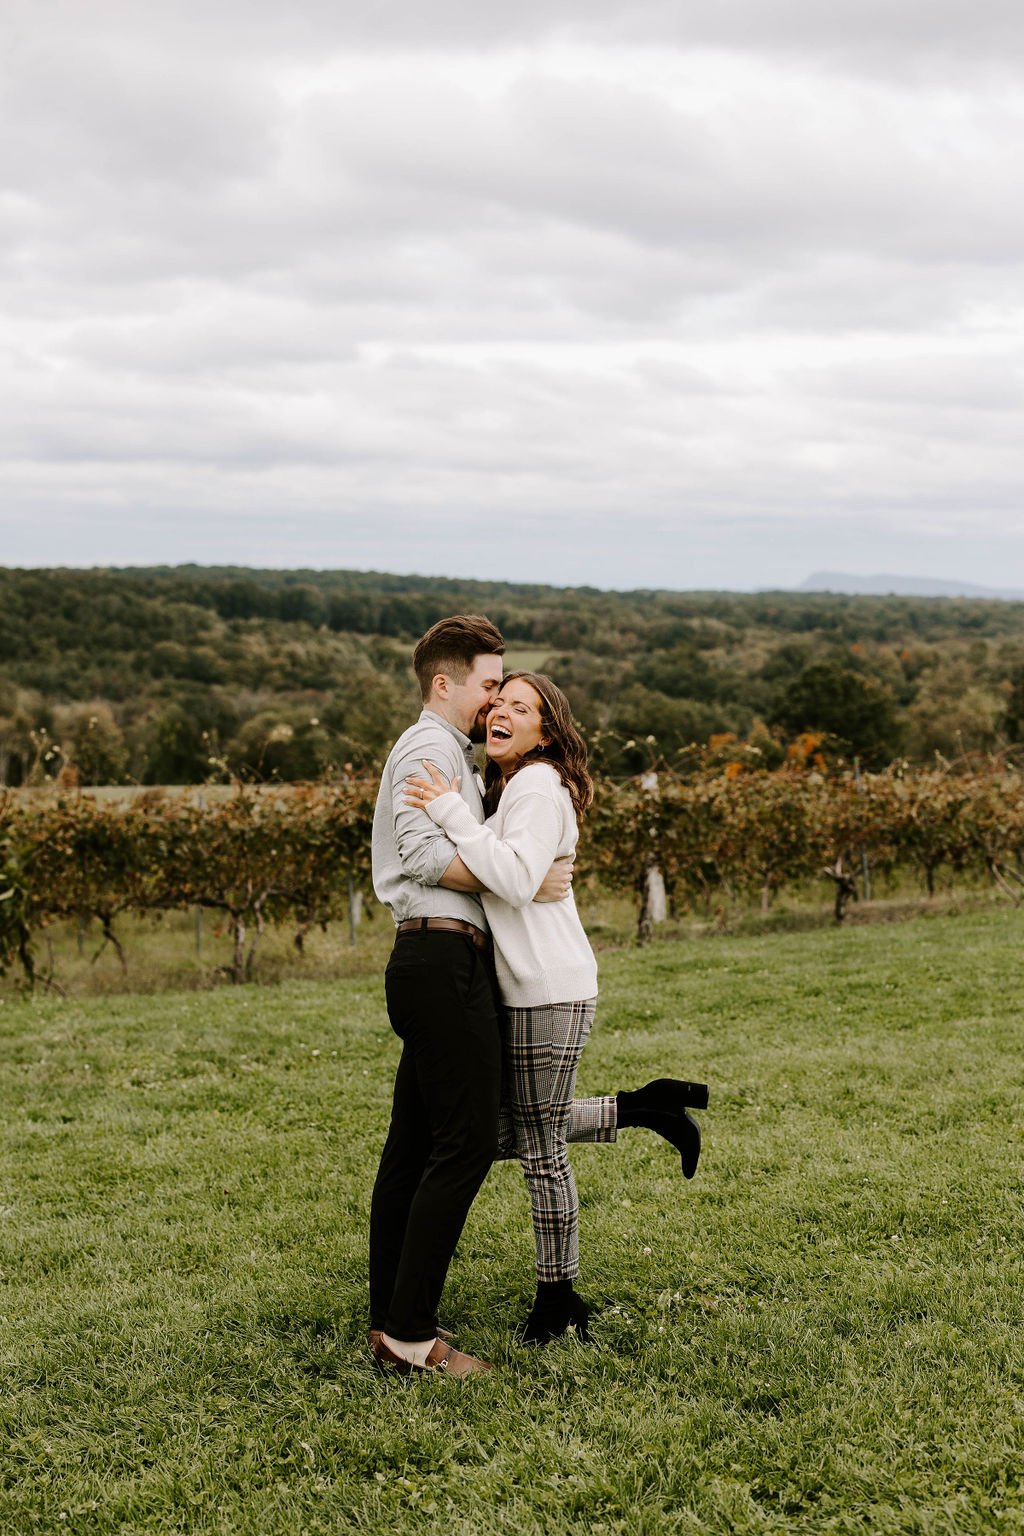 Engagement Photo Poses 101 from a Boston Photographer